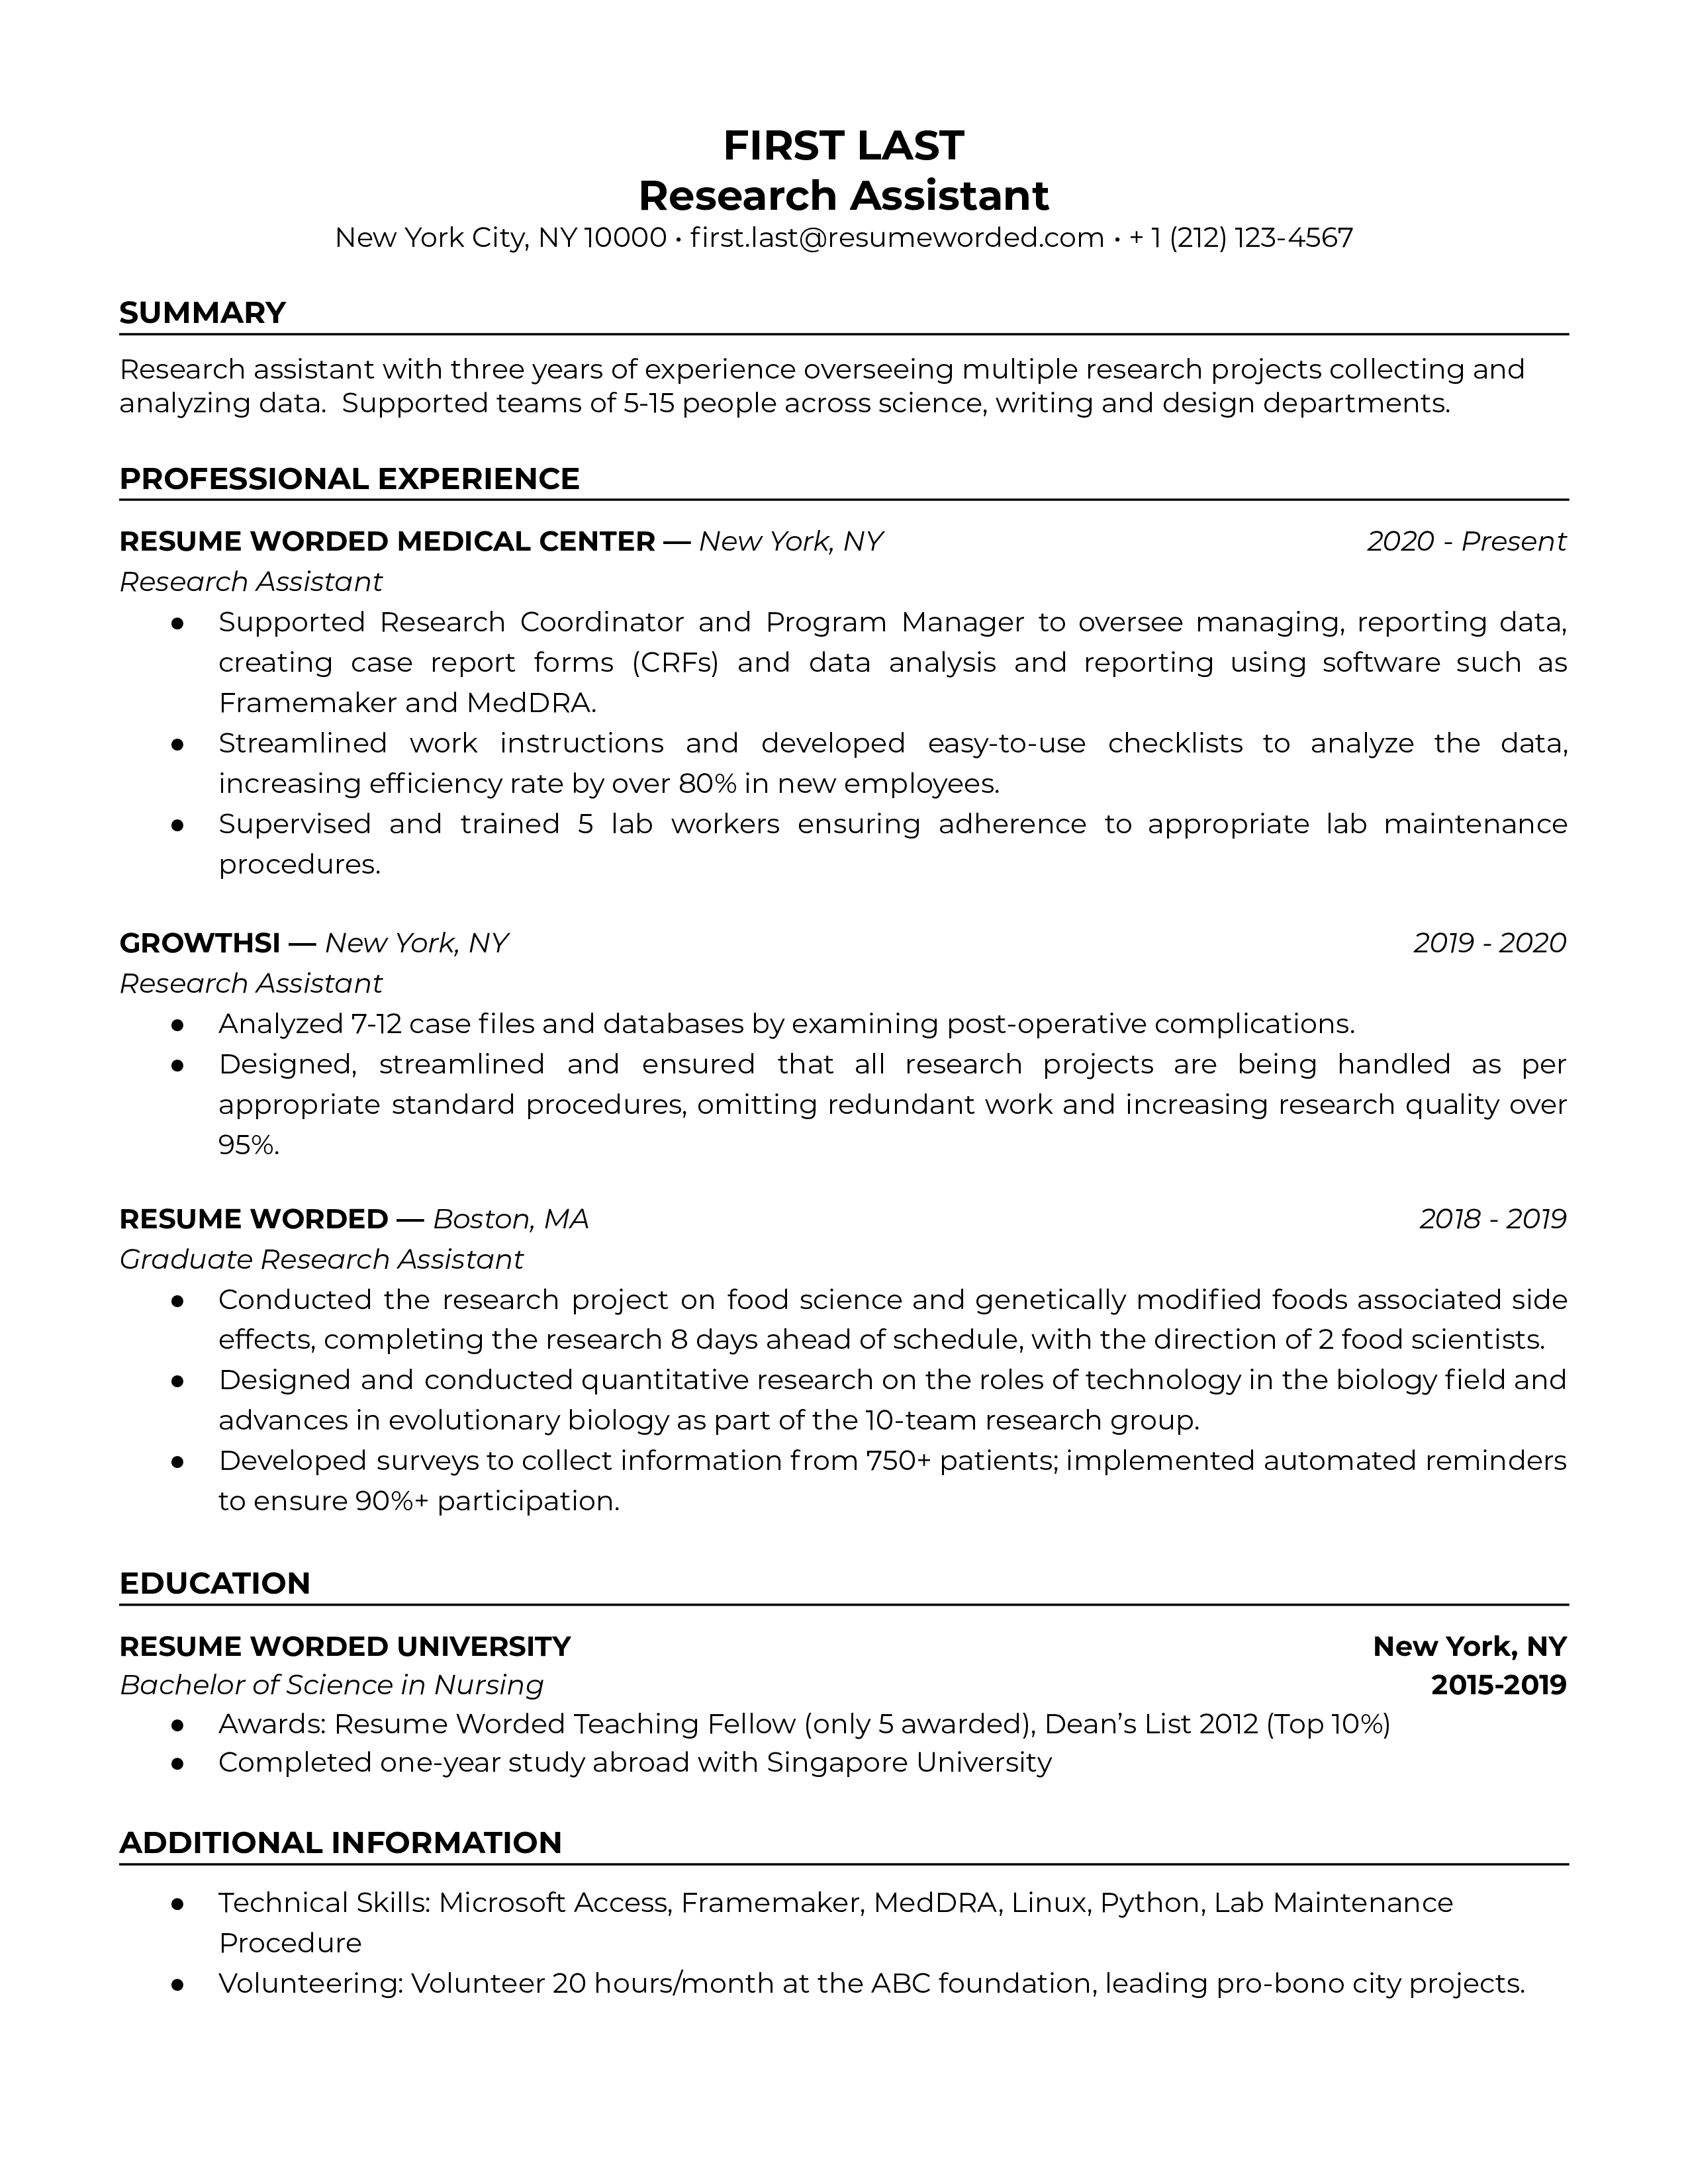 Research Assistant Resume Sample